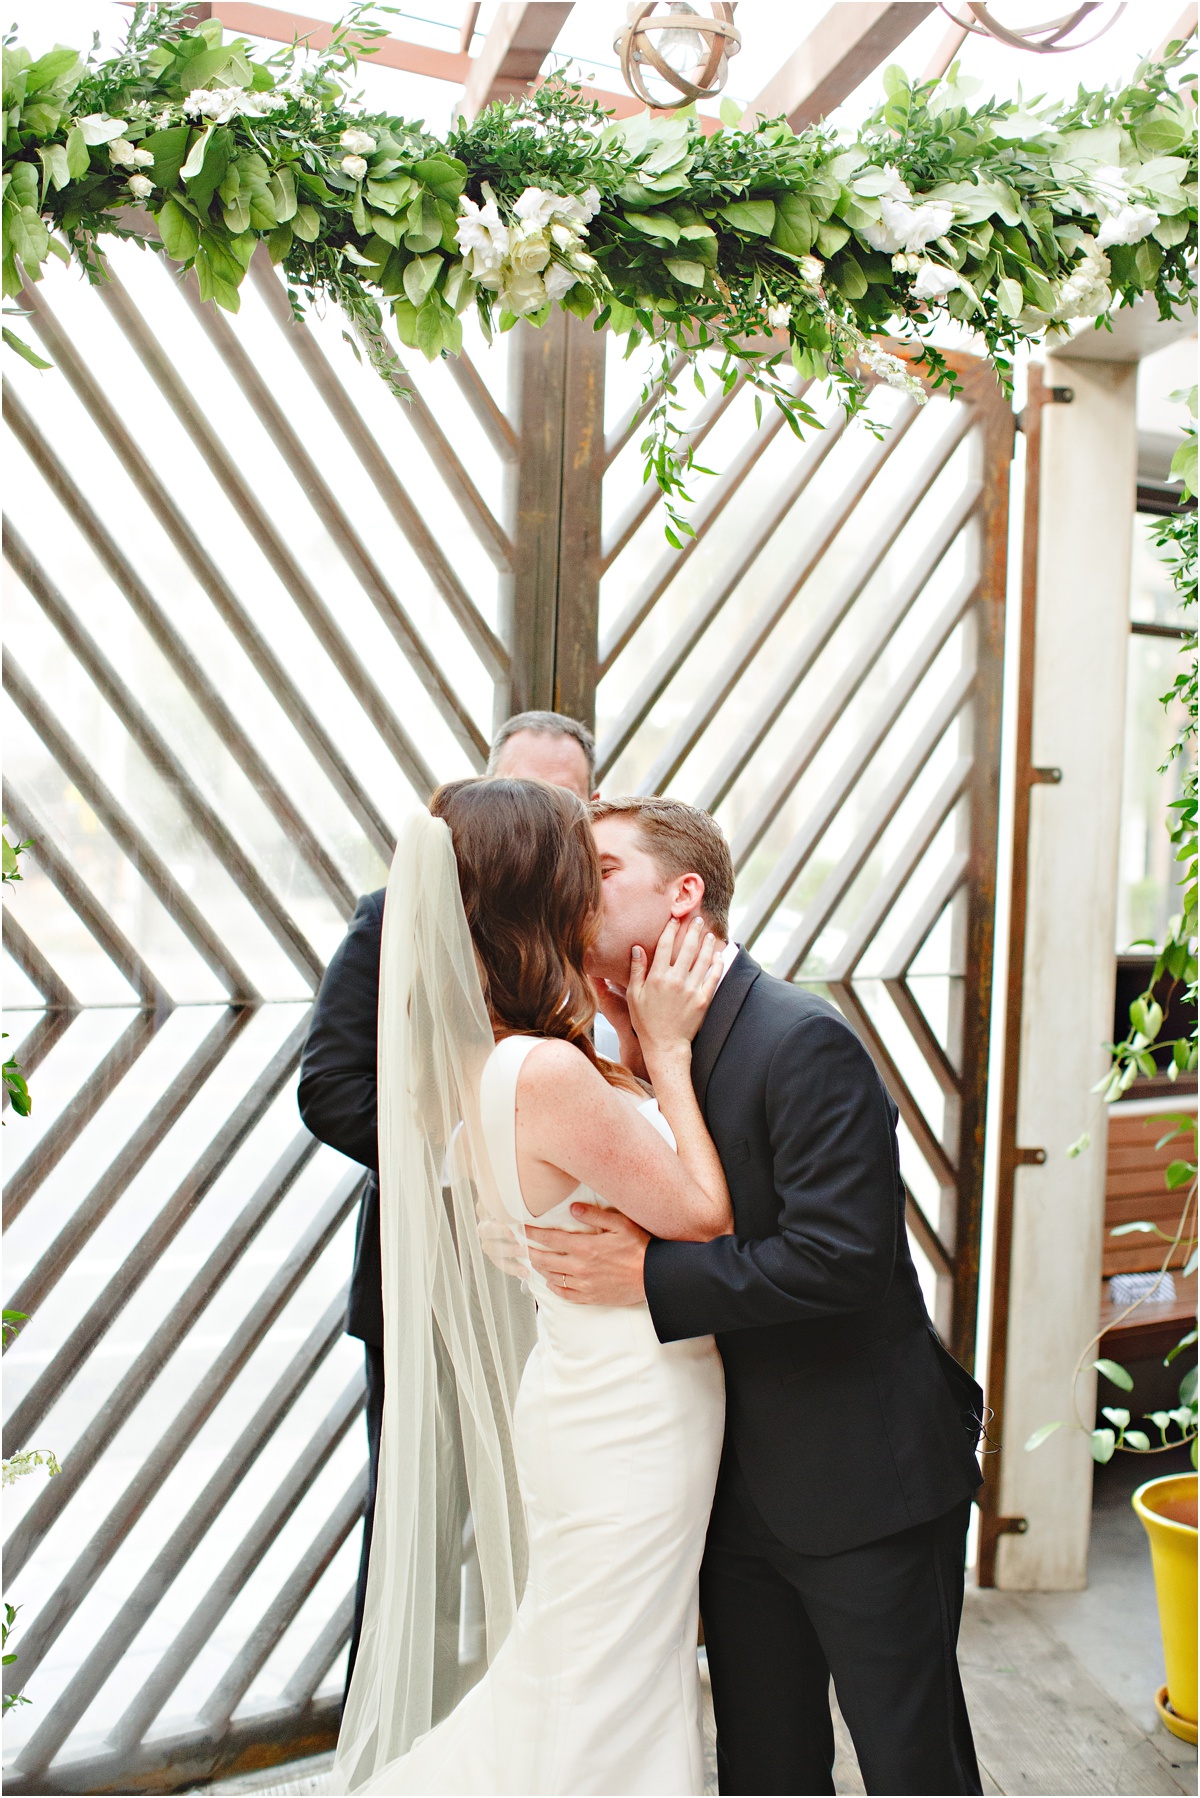 First Married Kiss | Stacee Lianna Photography